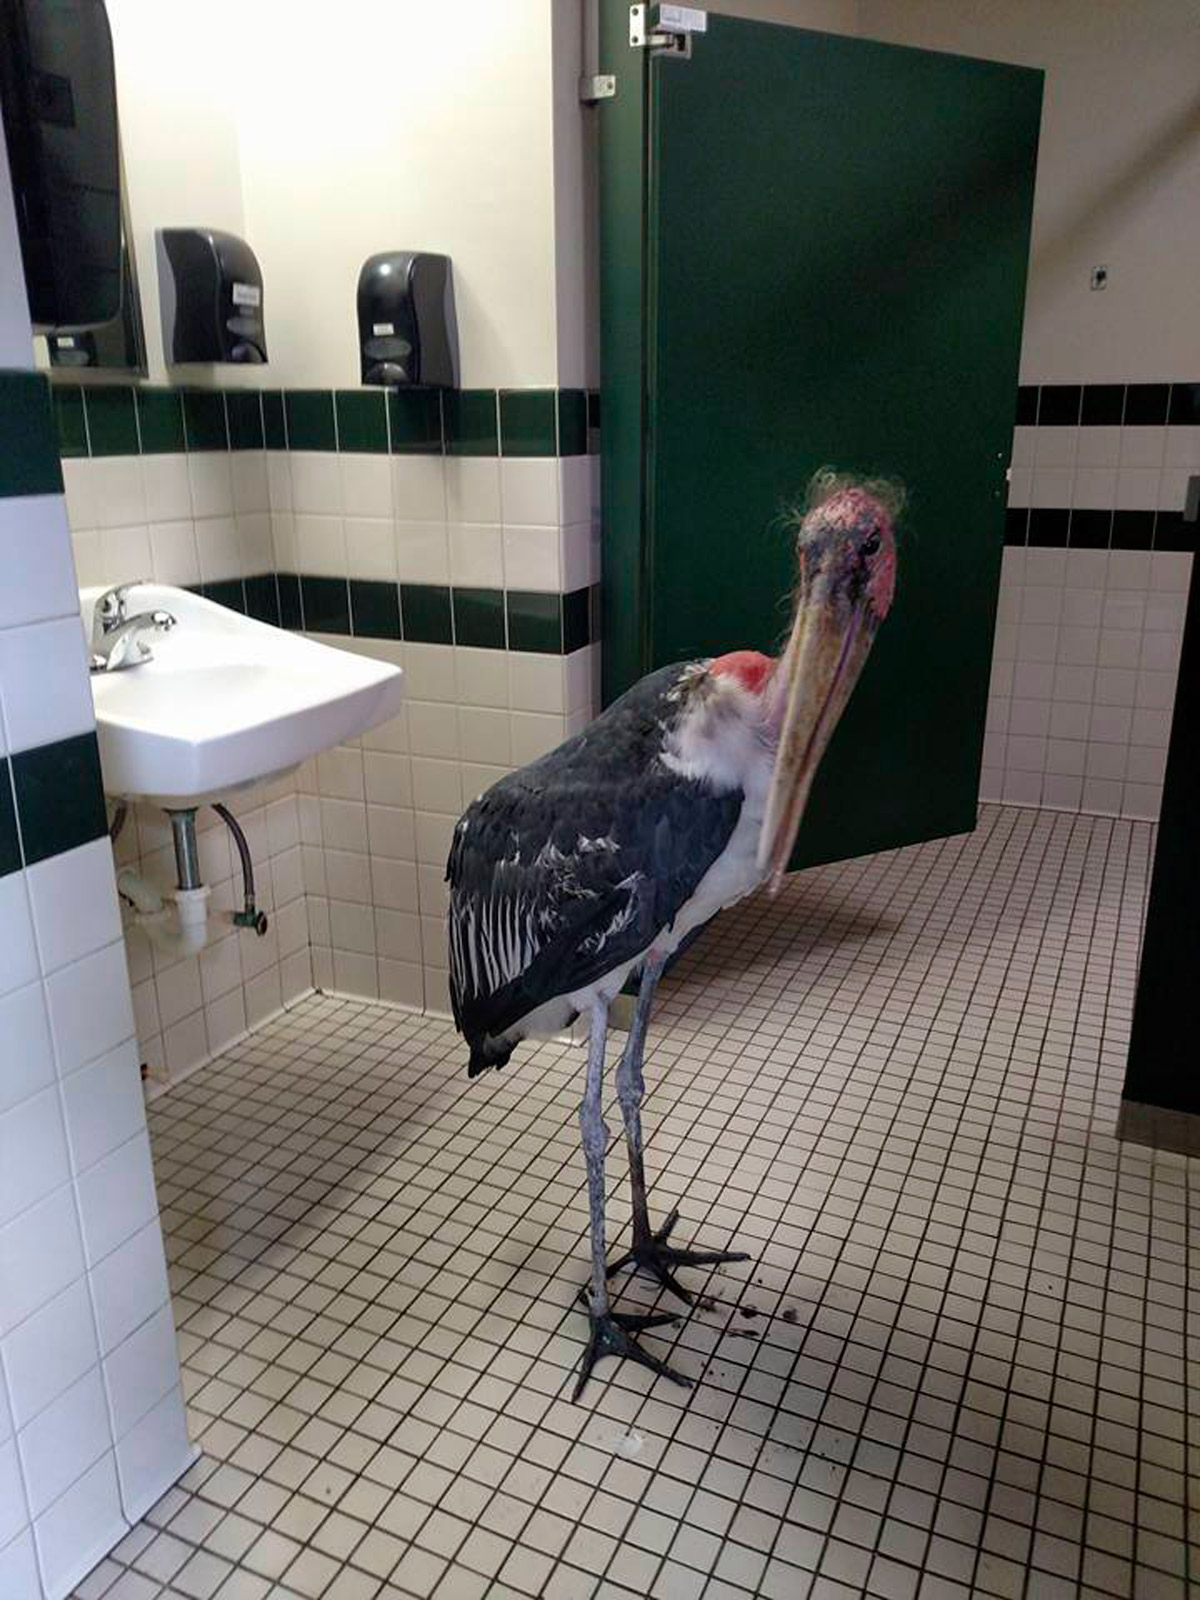 A marabou stork in a restroom at the St. Augustine Alligator Farm and Zoological Park on Oct. 6, 2016.